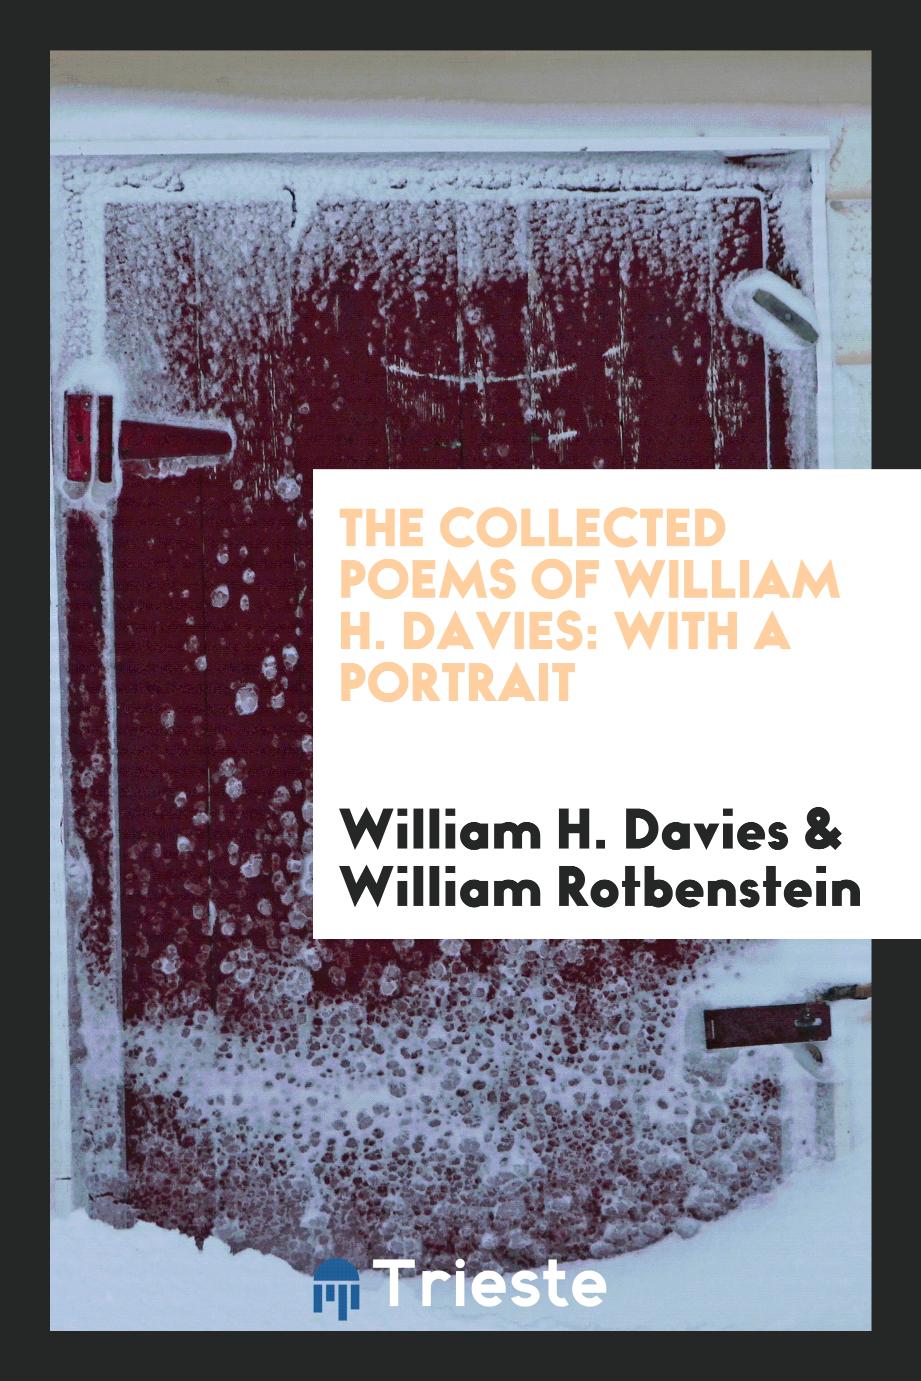 The Collected Poems of William H. Davies: With a Portrait